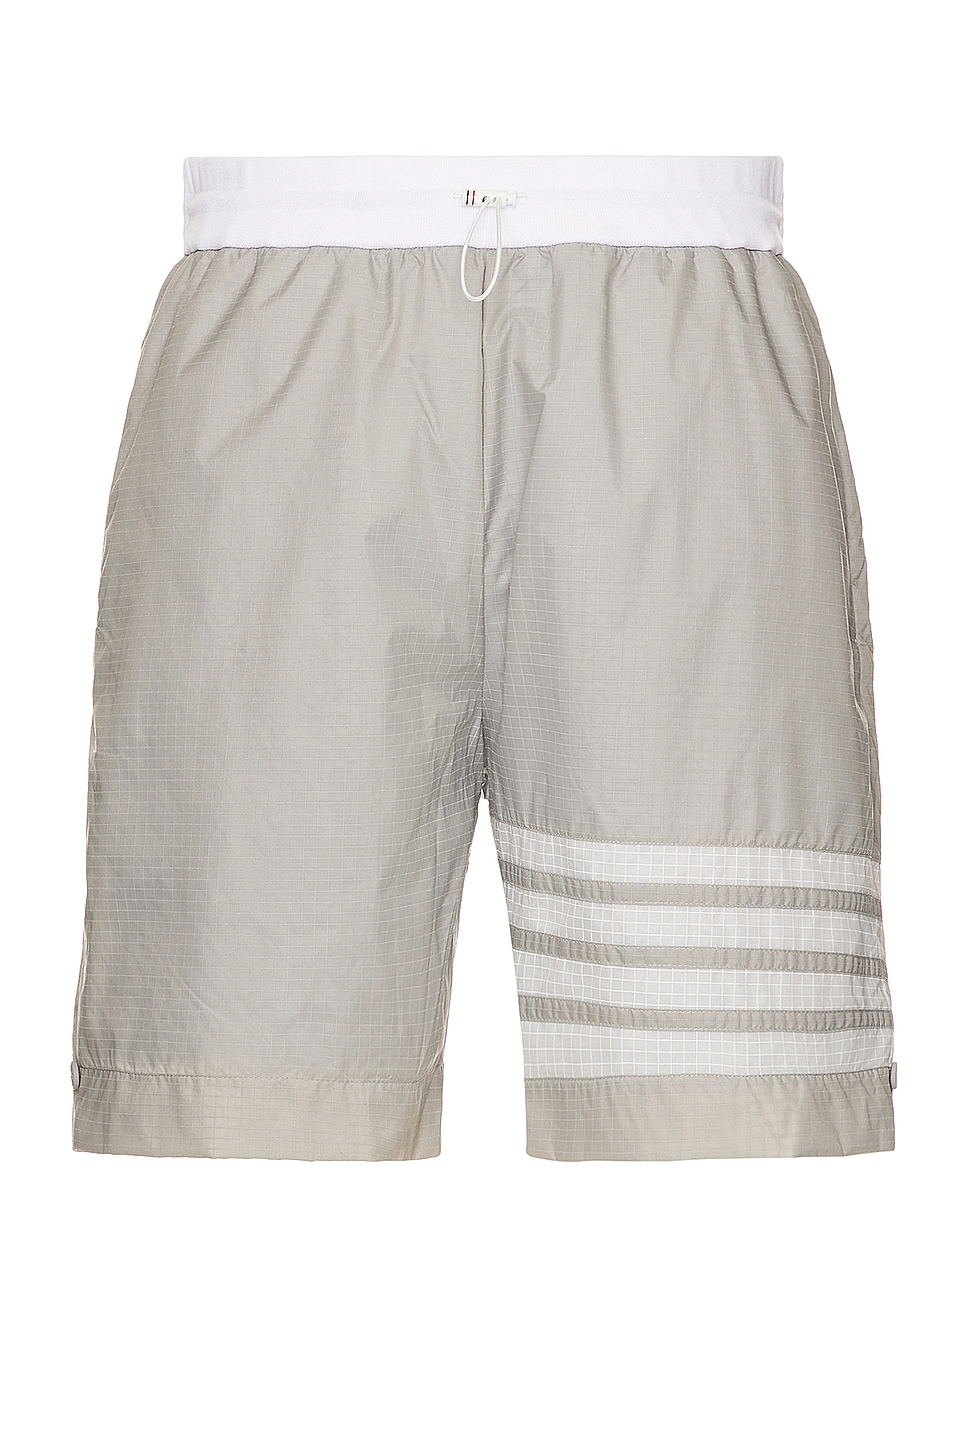 Image 1 of Thom Browne Nylon Ripstop Shorts in Light Grey